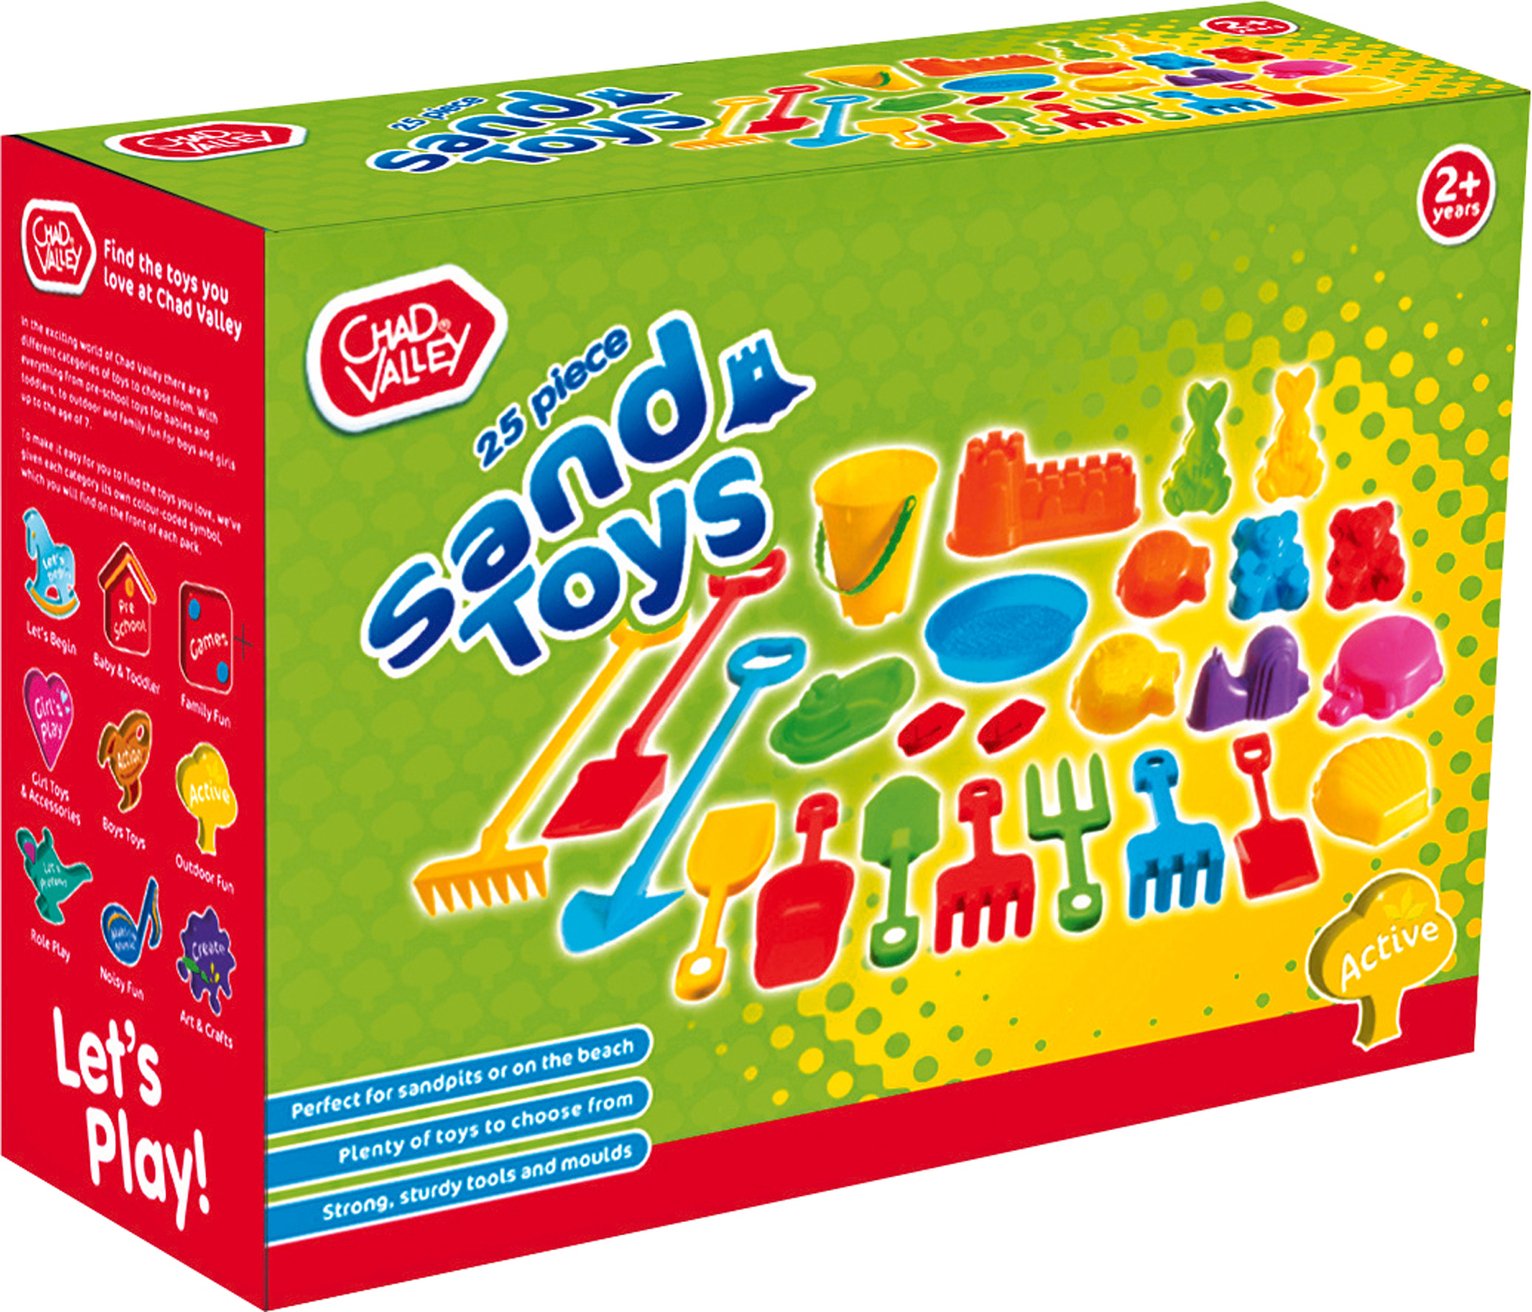 Chad Valley 25 Piece Sand Toy Accessory Set Review